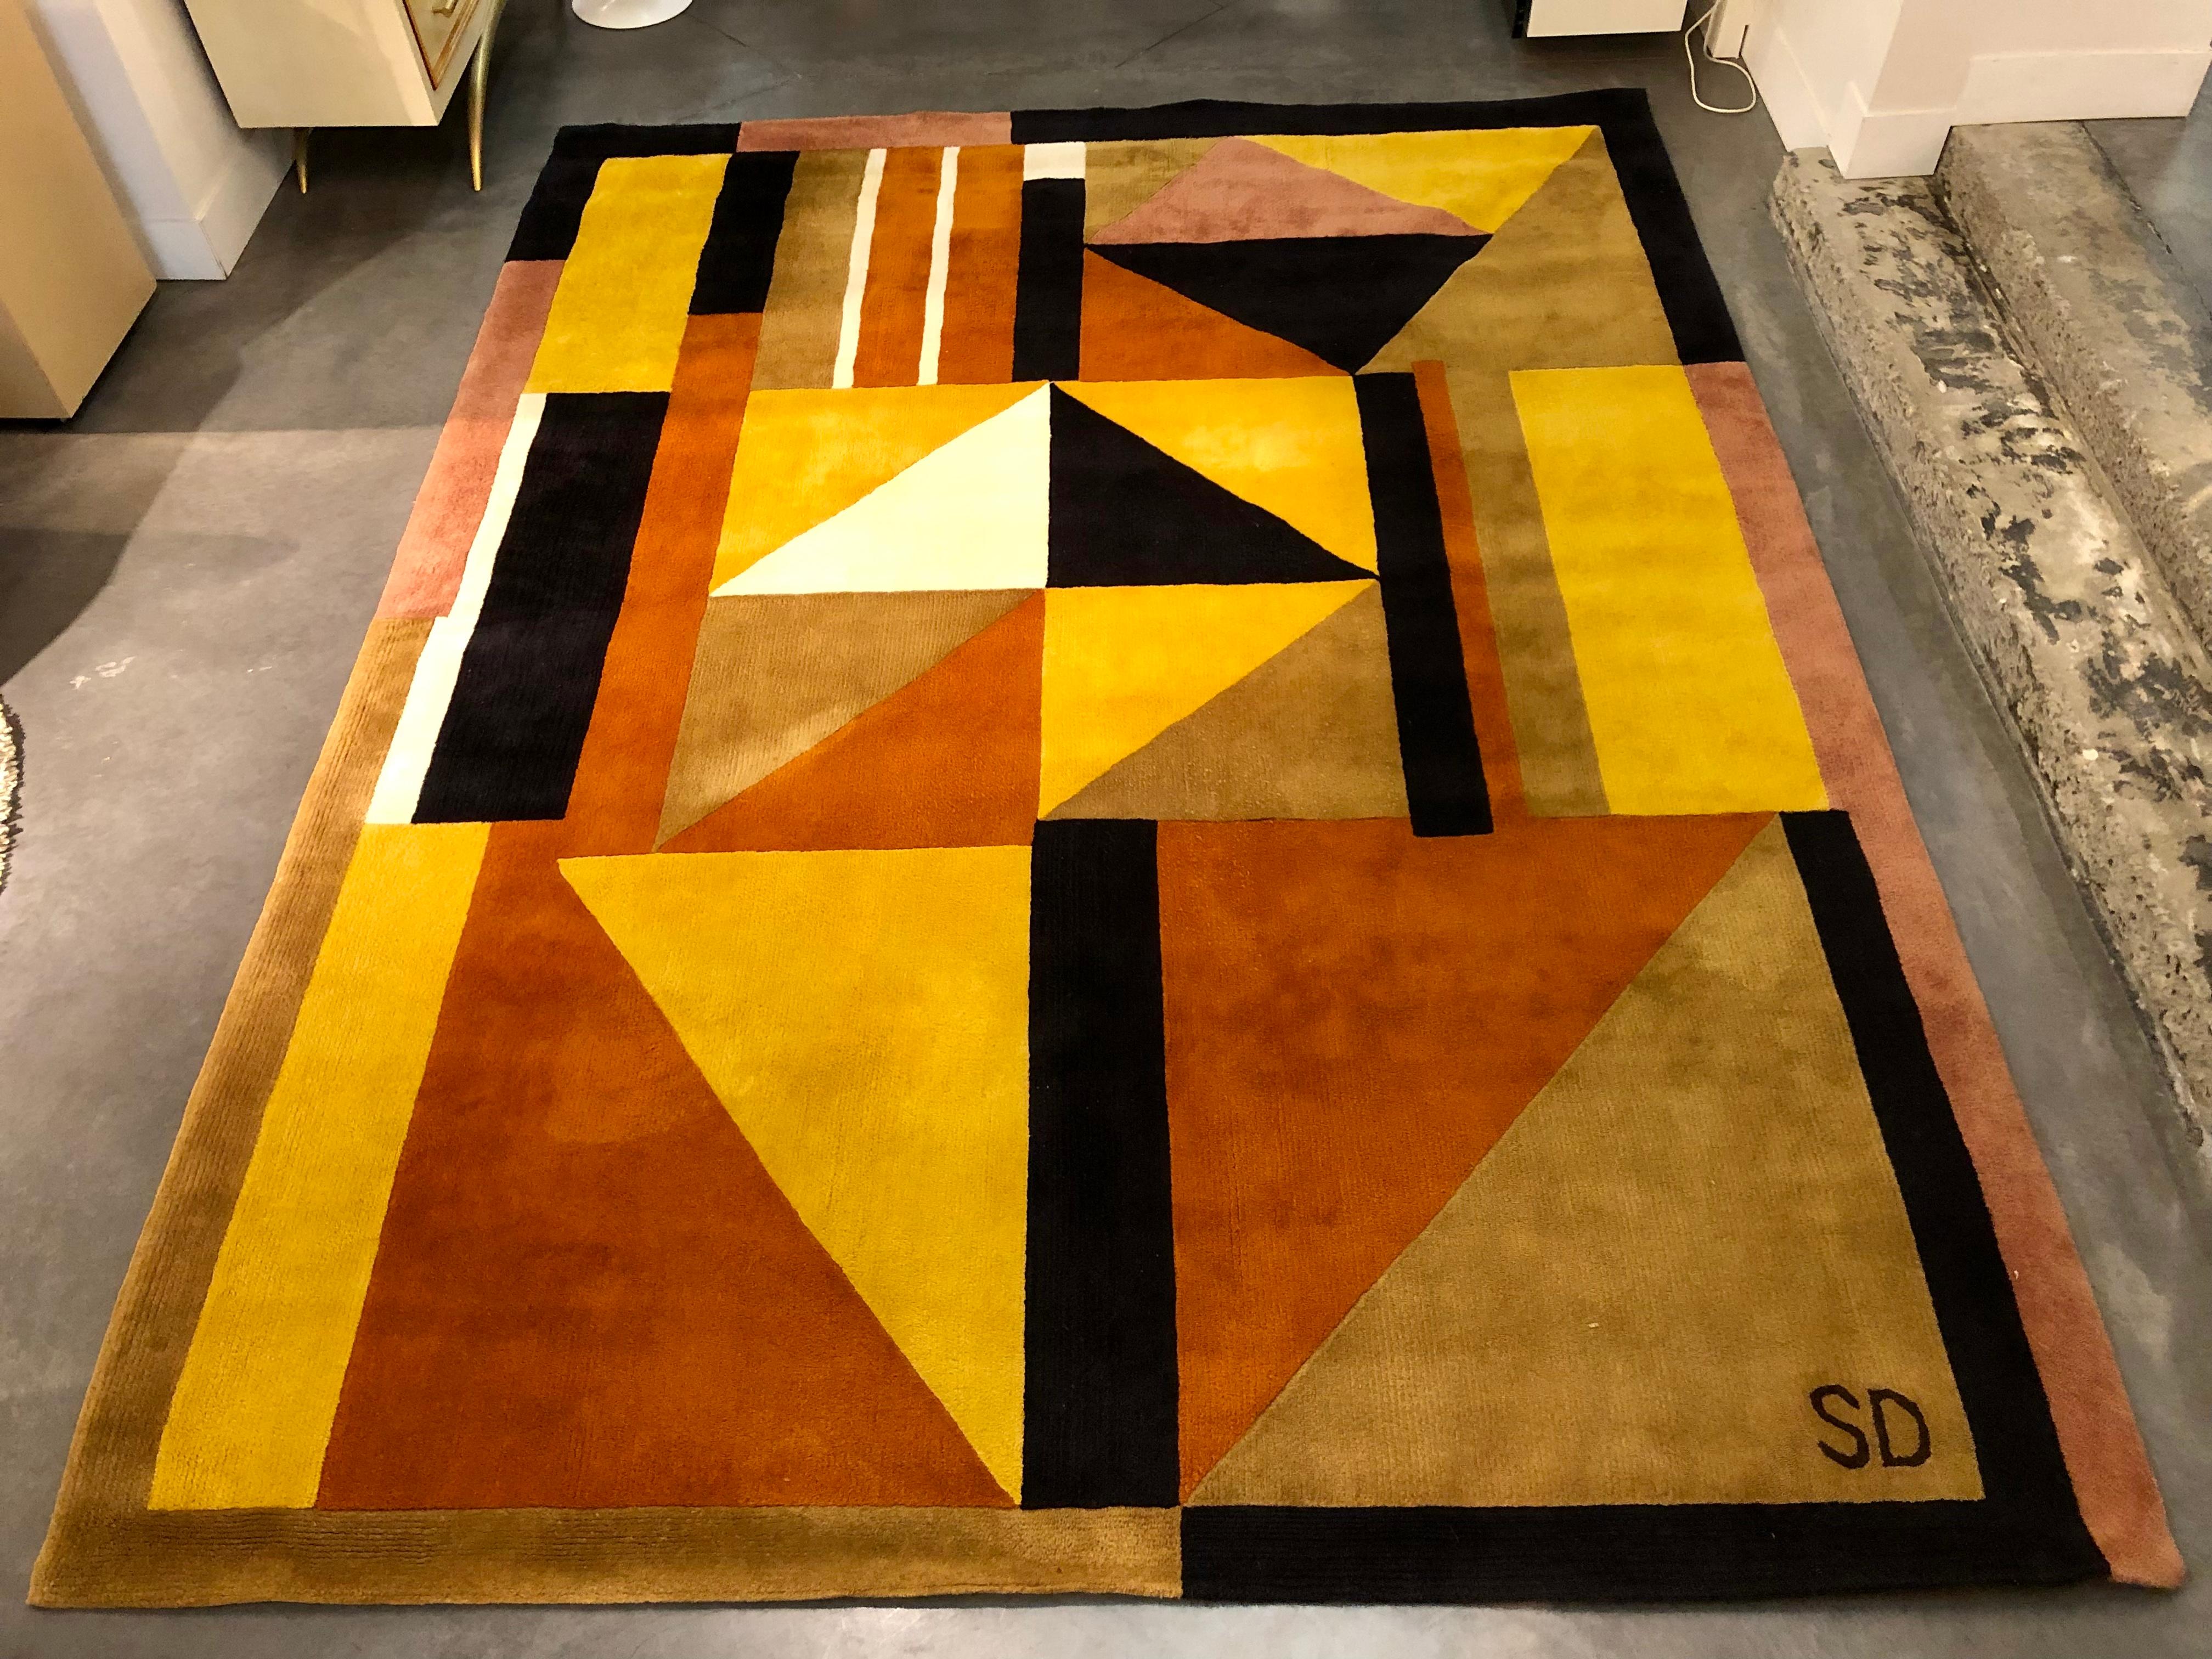 Exclusive rug designed by Sonia Delaunay and edited by Artcurial in the ‘80 in a limited edition of 10 
Pieces.
High standard quality of fabrication with a hand tufting in France.
Very decorative and very modern design.
This is the big size of